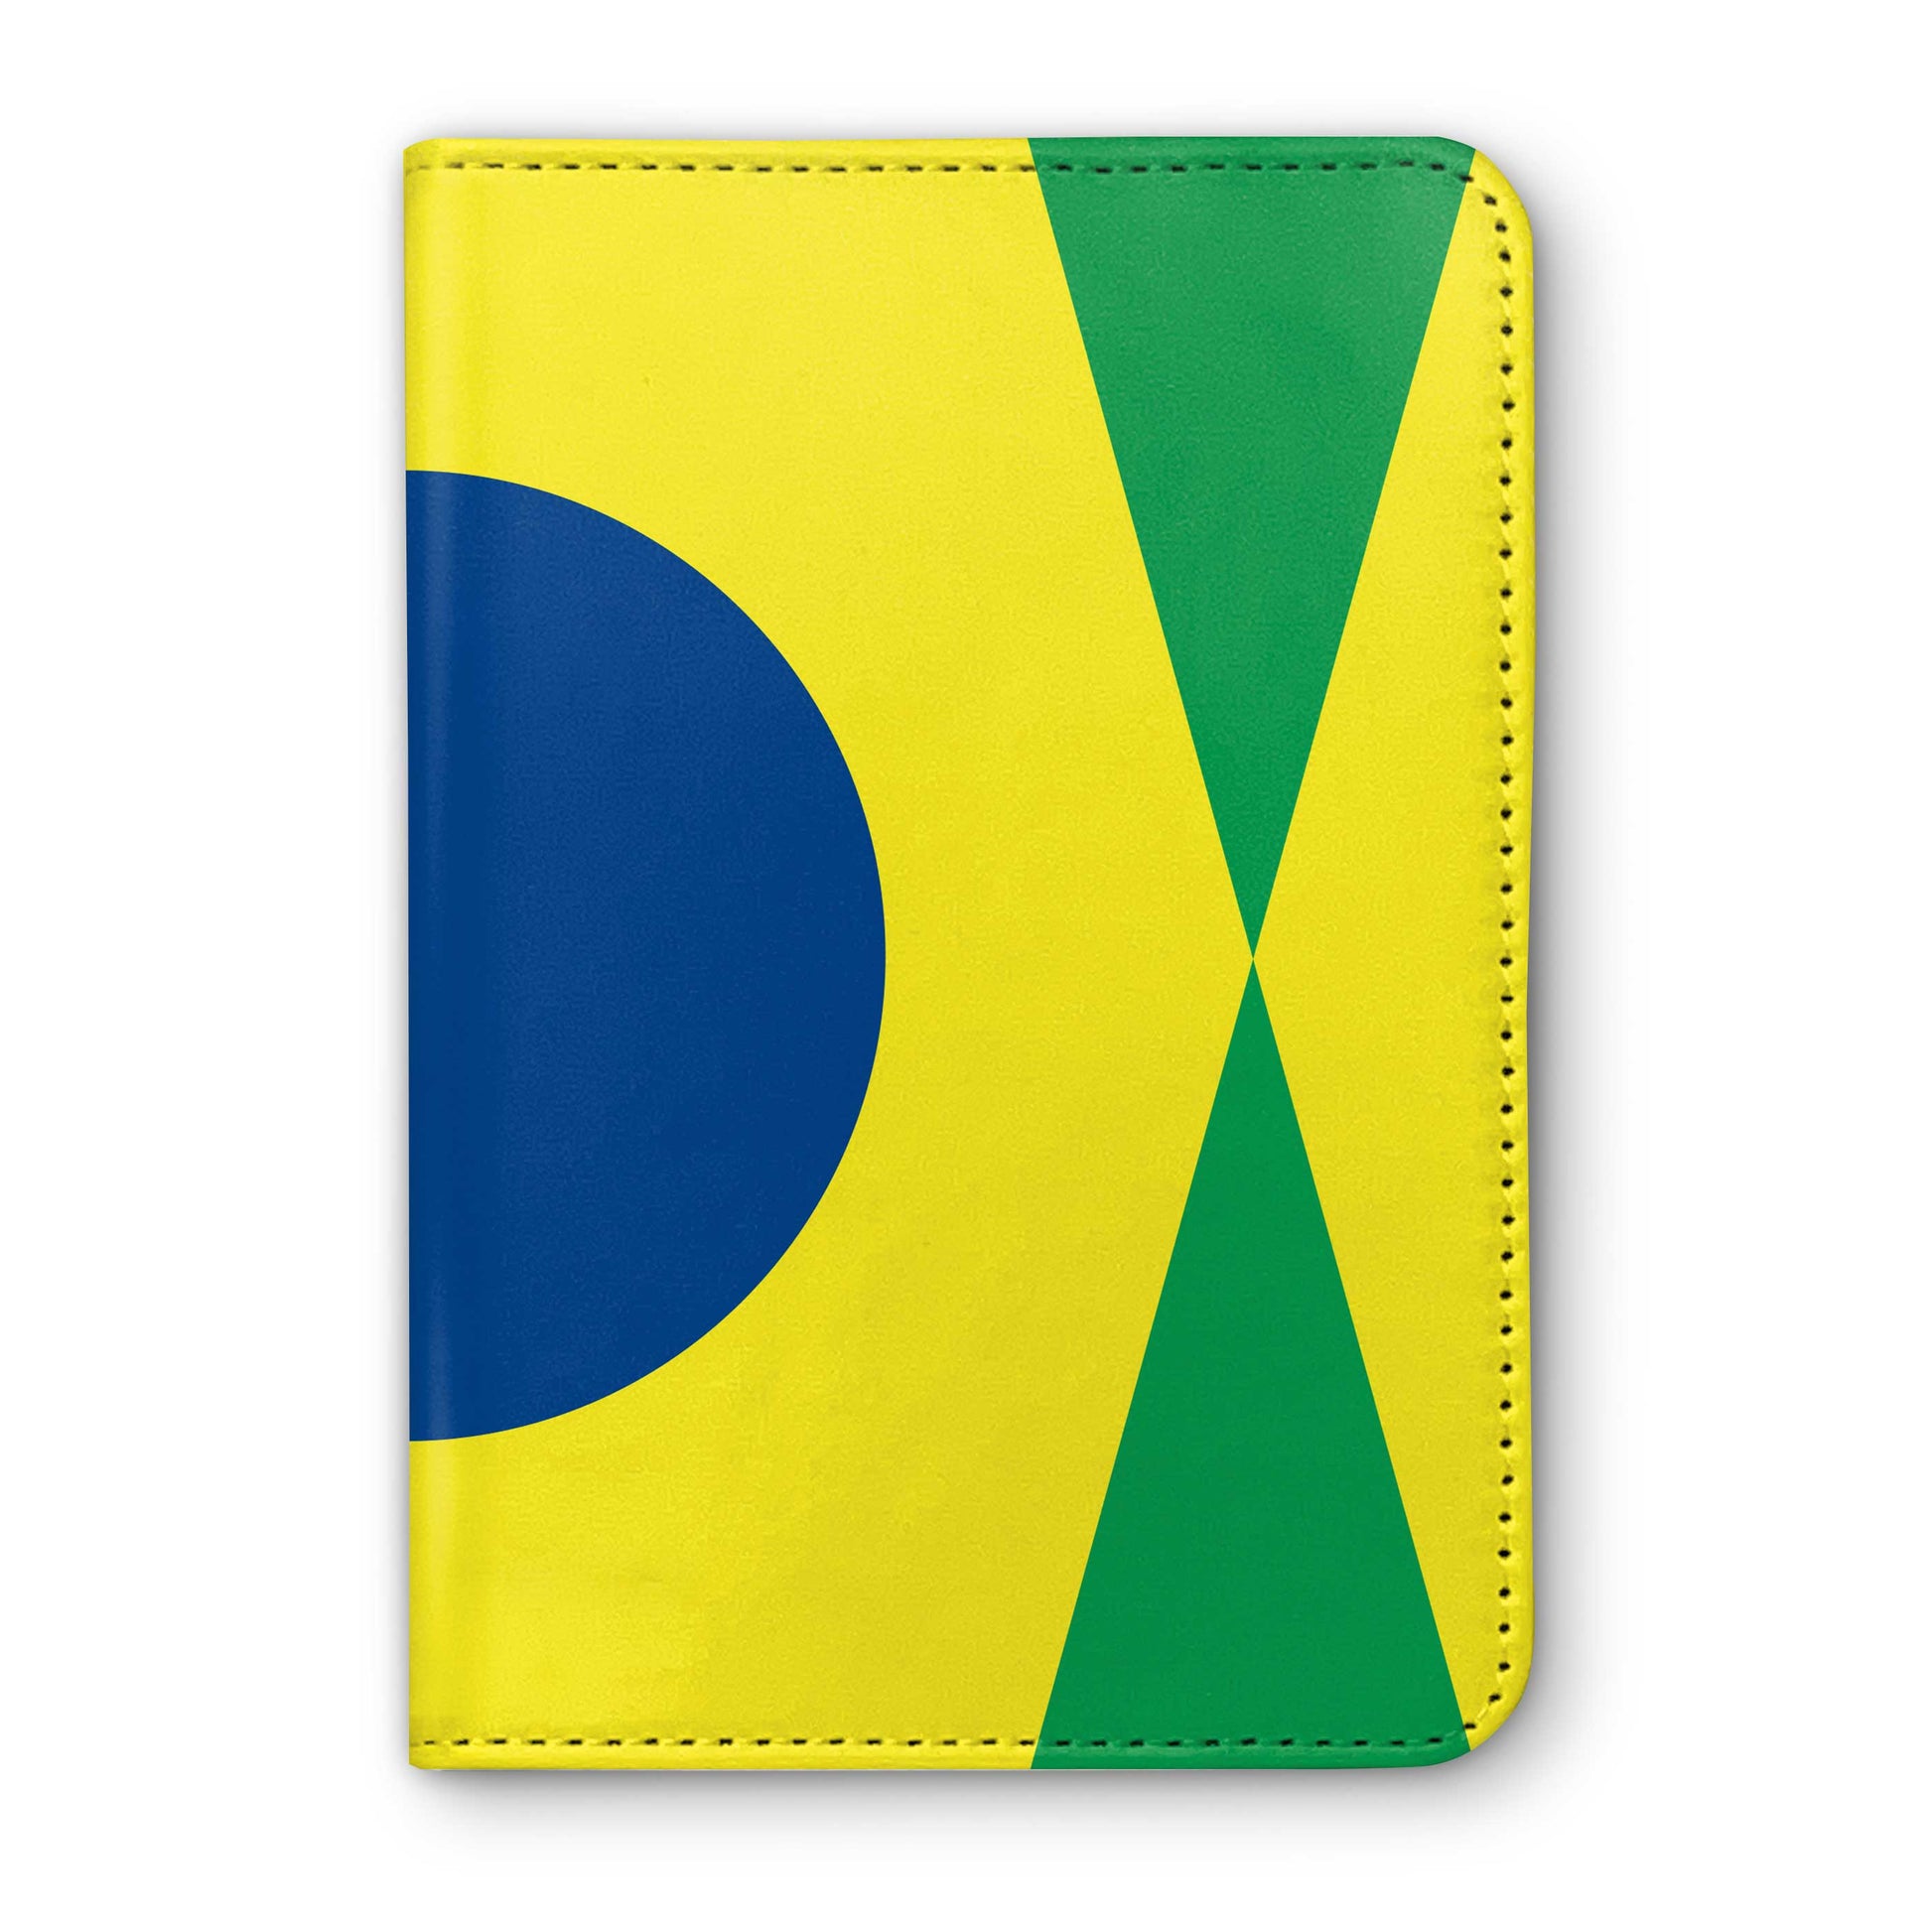 Rio Gold Racing Club Horse Racing Passport Holder - Hacked Up Horse Racing Gifts